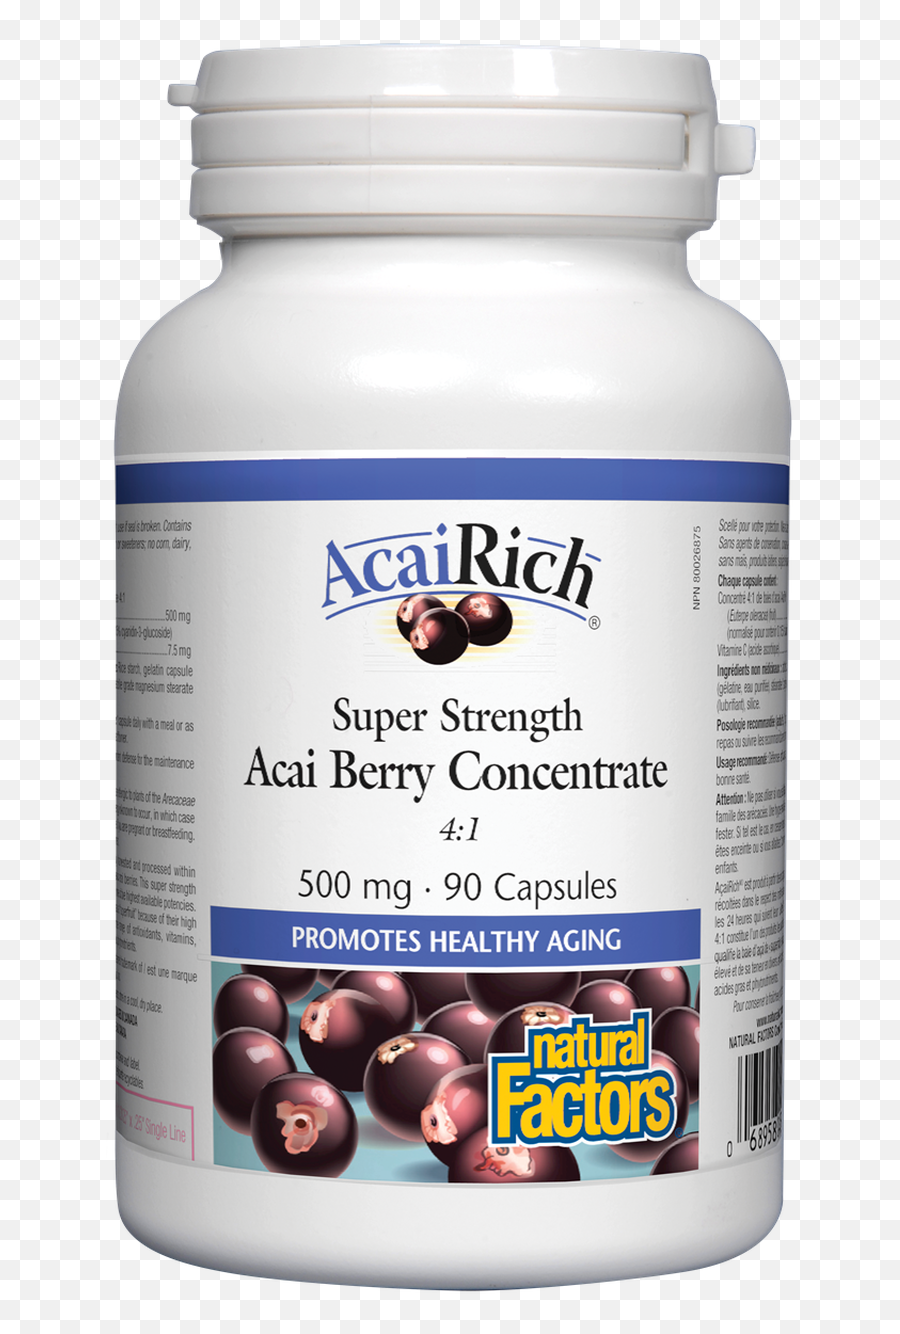 Natural Factors Acairich - Super Strength 500mg 90 Capsules Emoji,Daily Emotion Blueberry